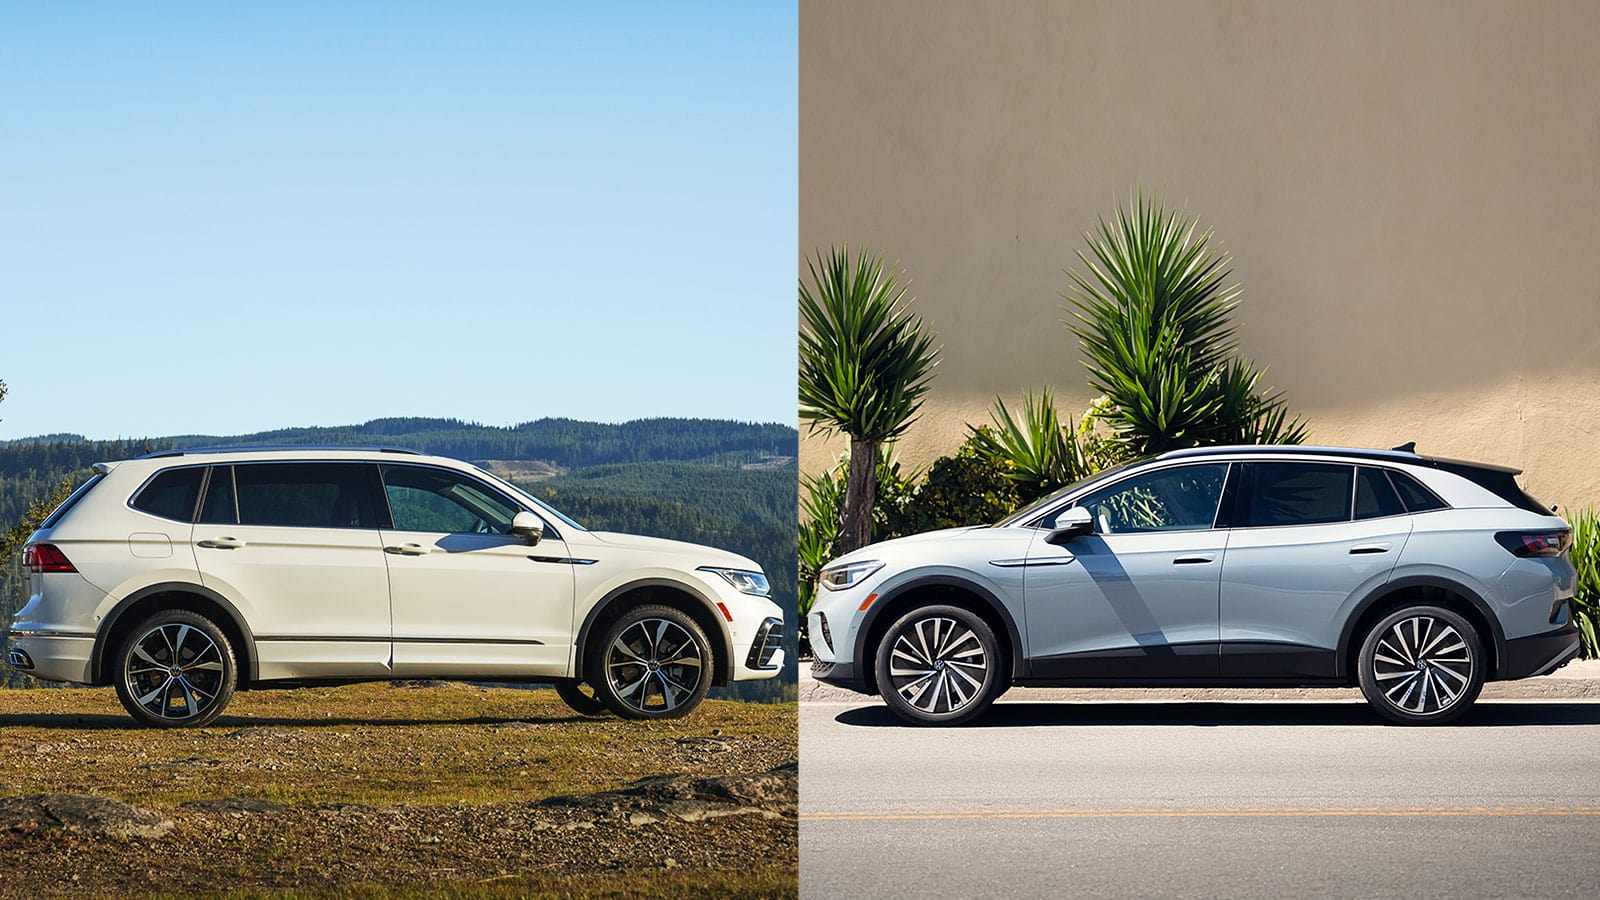 Tiguan on left, ID.4 on right, facing each other, true cost to own